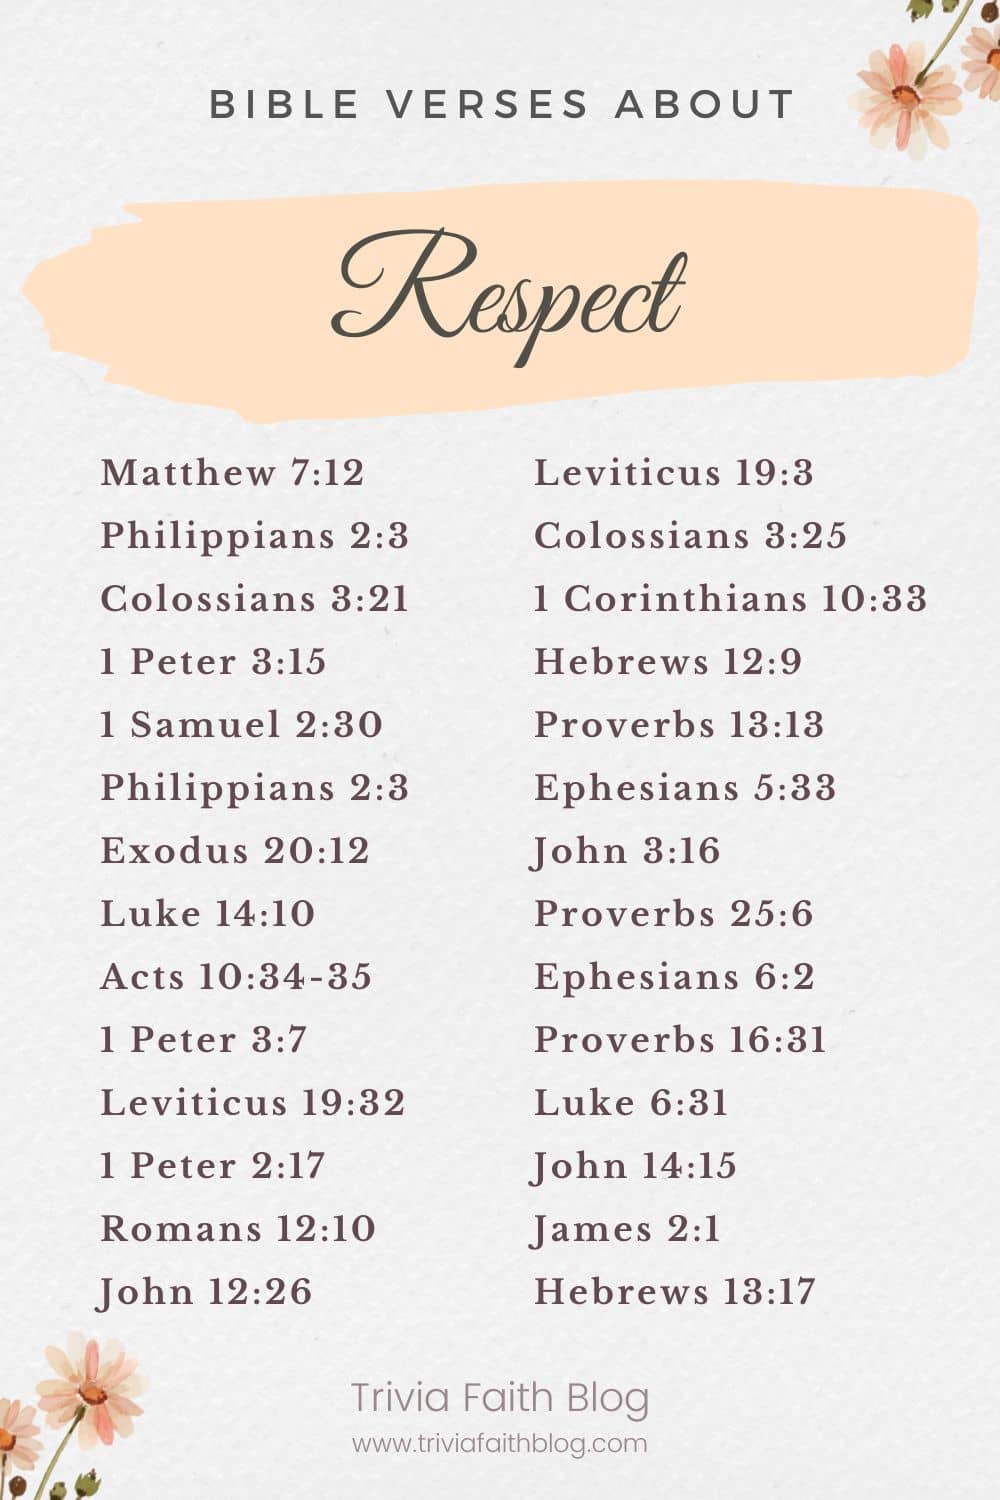 Bible verses about respect
Bible Scriptures on Respect